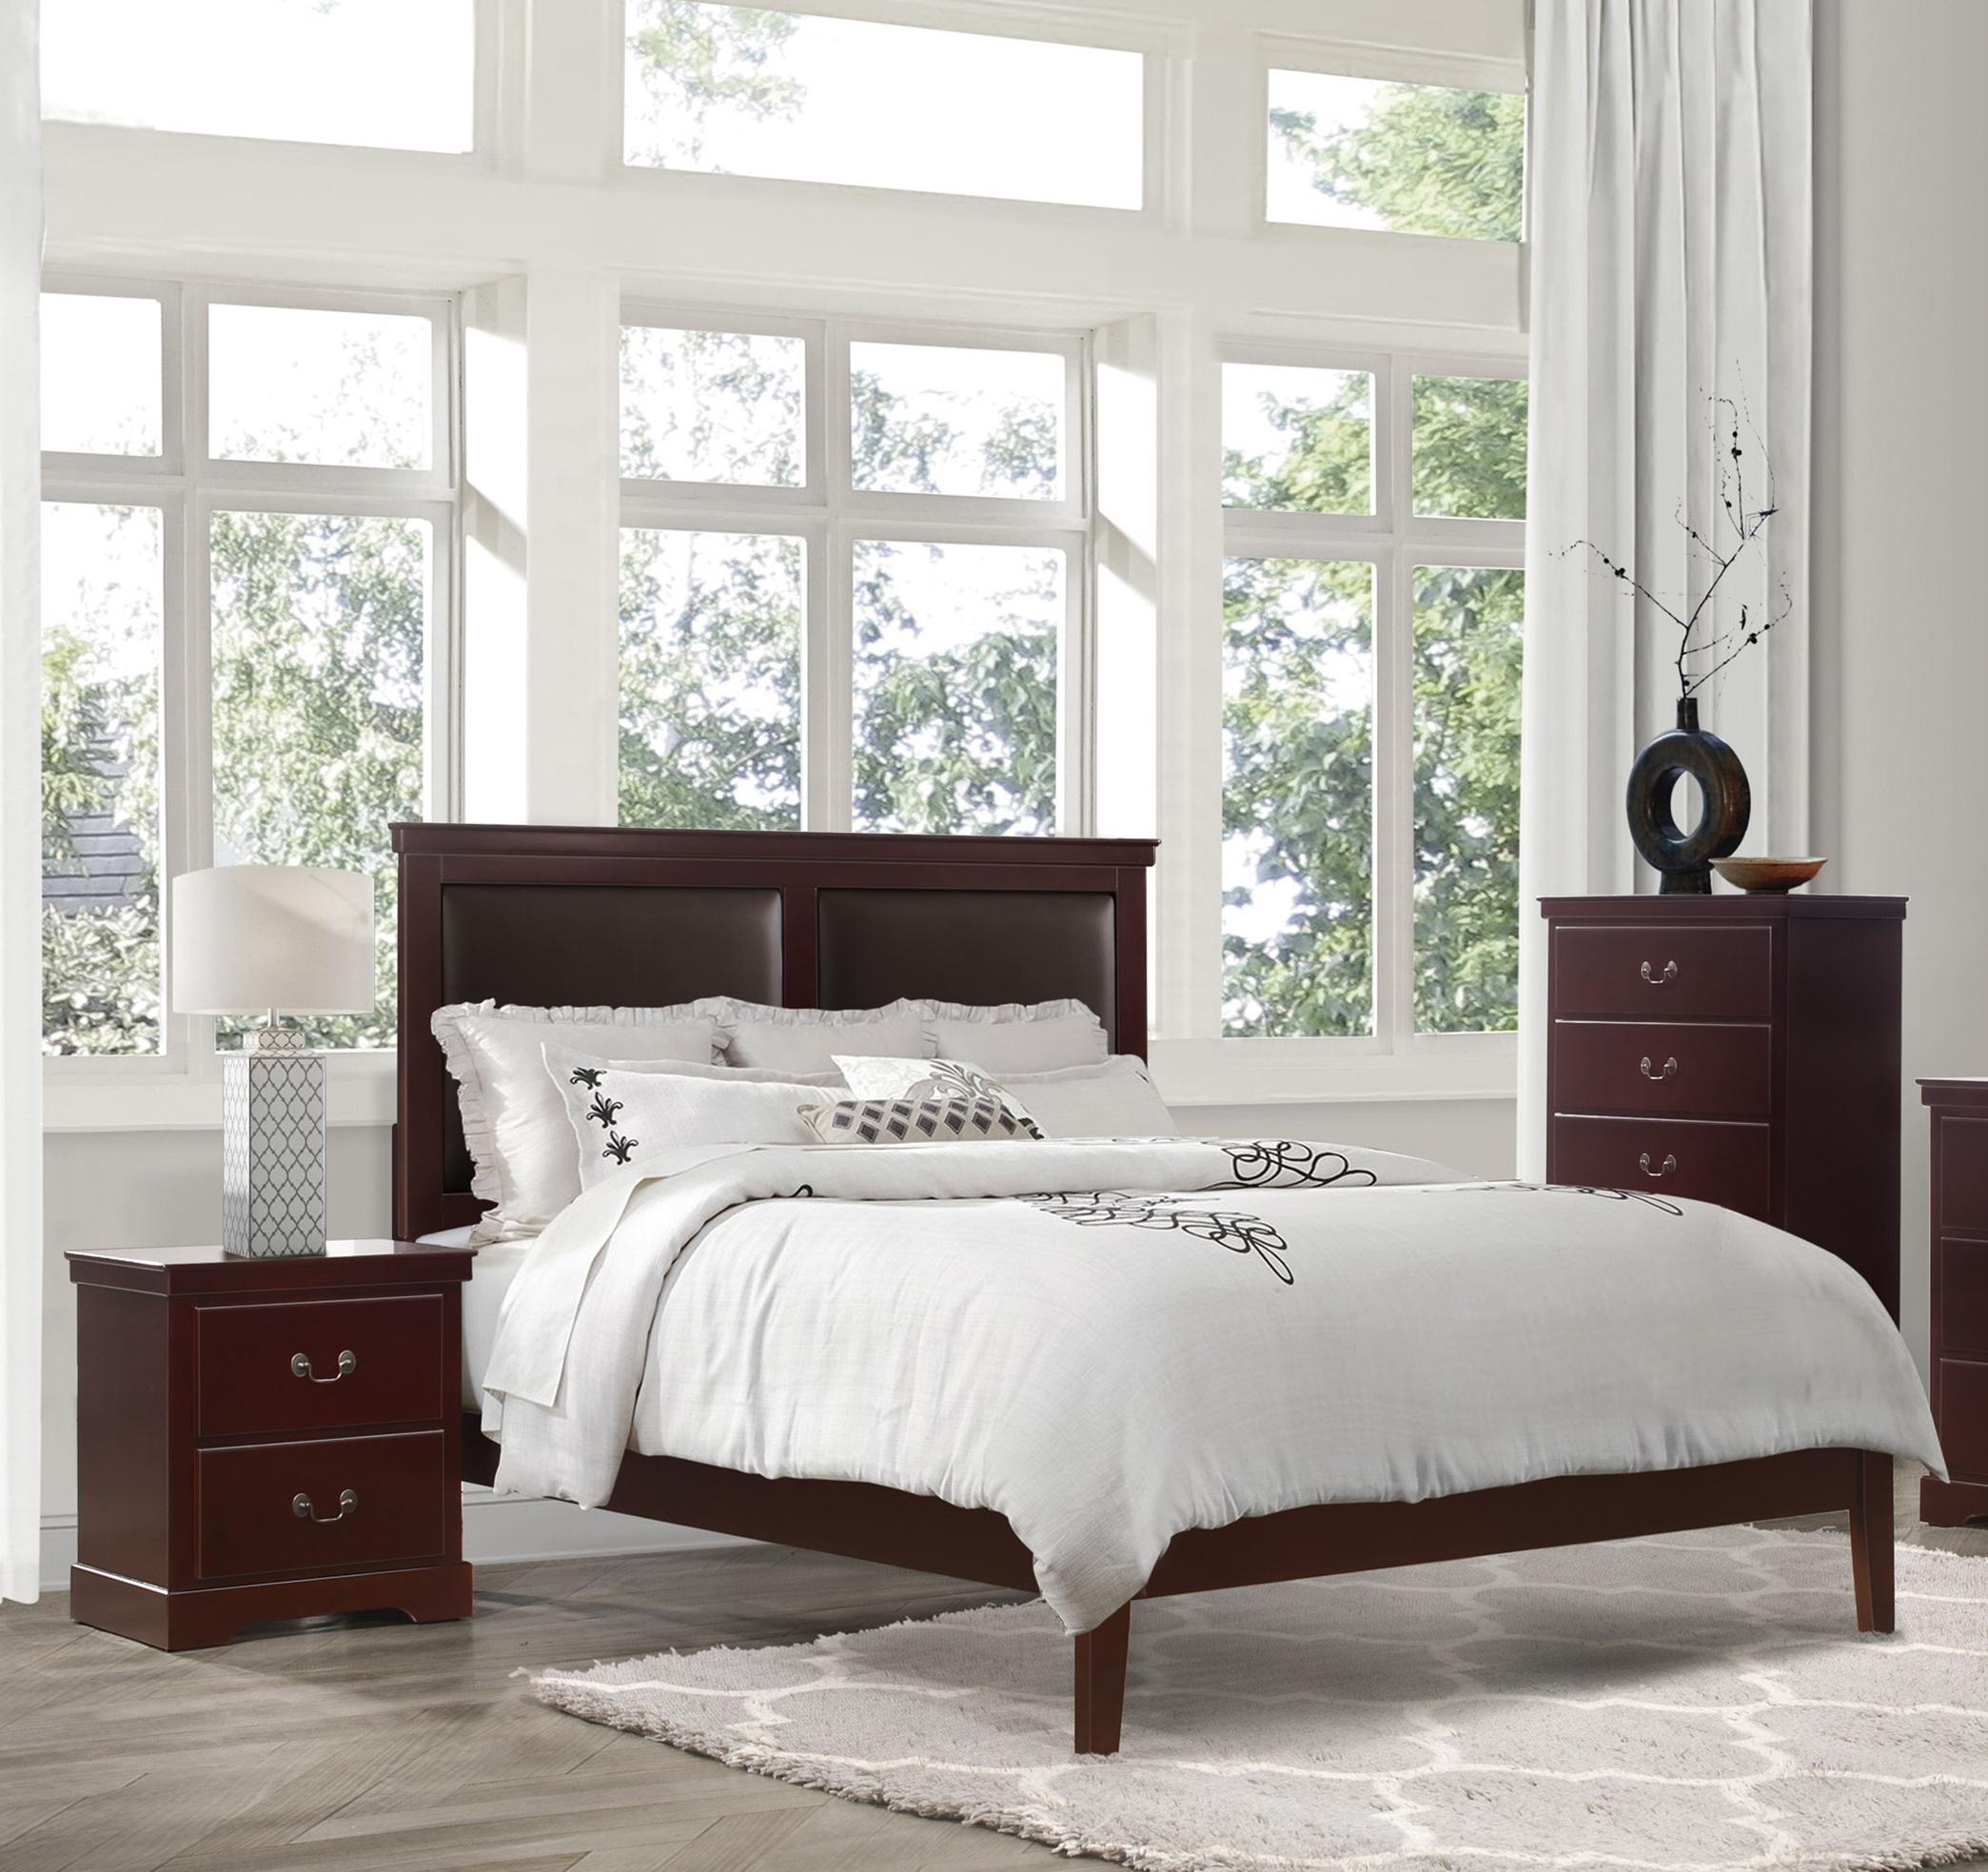 Modern Bedroom Set 1519CHF-1-3PC Seabright 1519CHF-1-3PC in Cherry Faux Leather